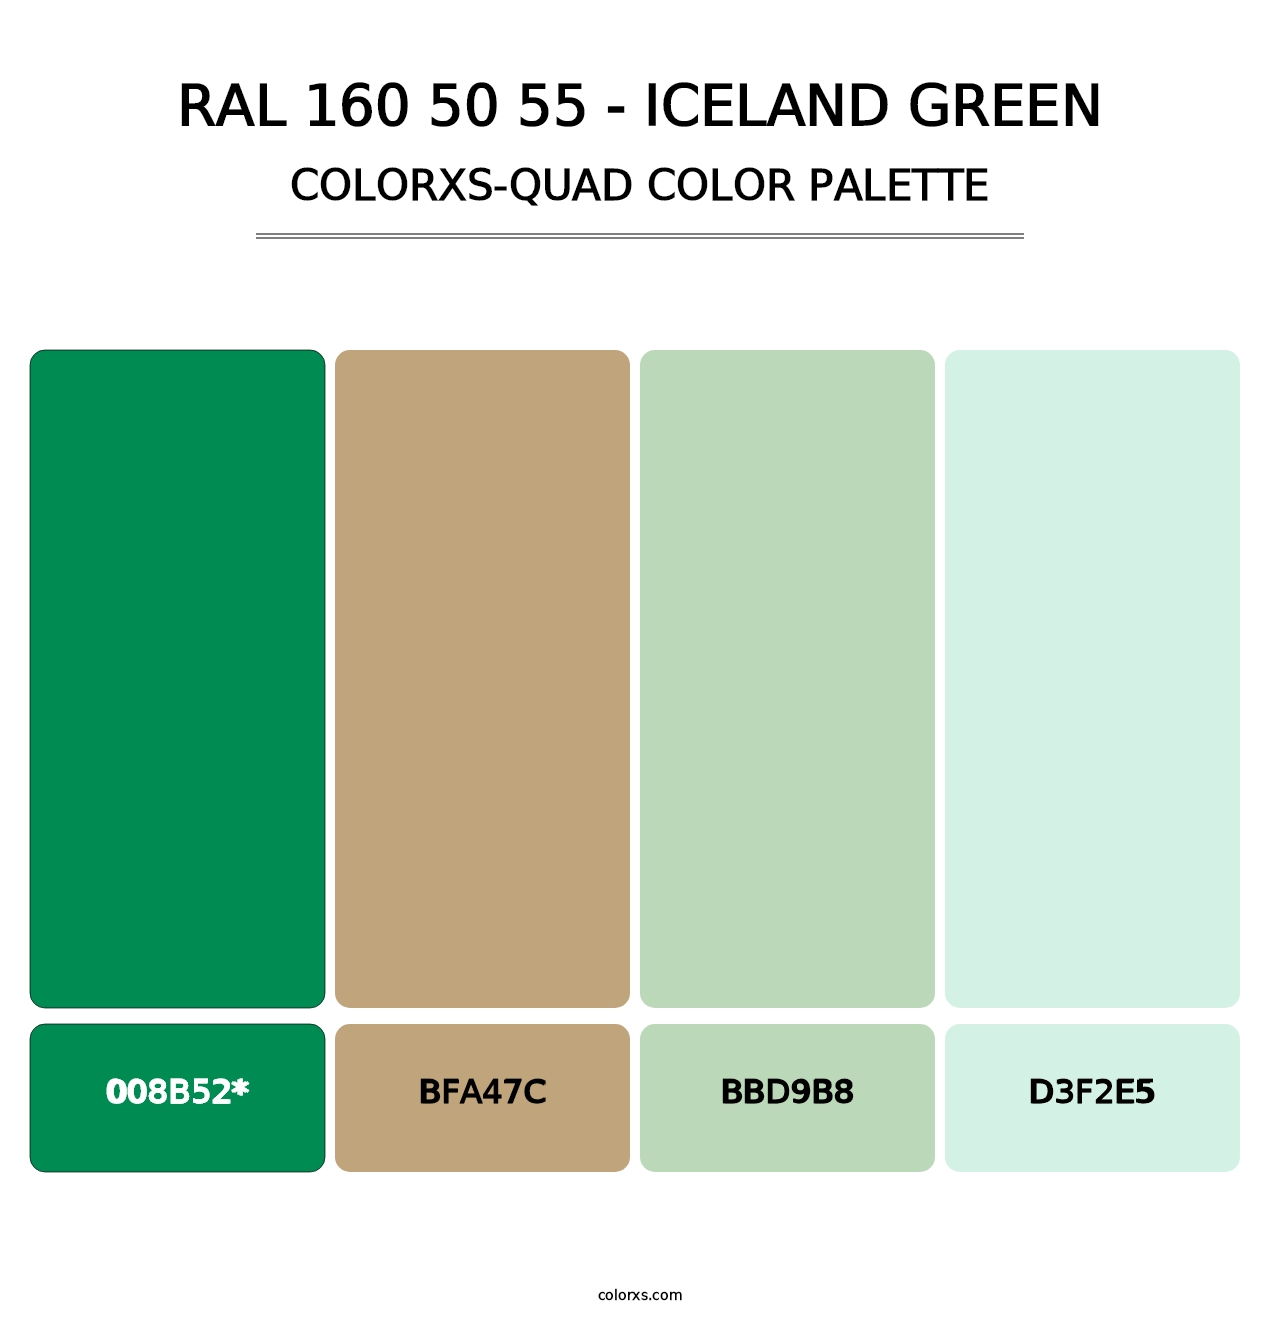 RAL 160 50 55 - Iceland Green - Colorxs Quad Palette